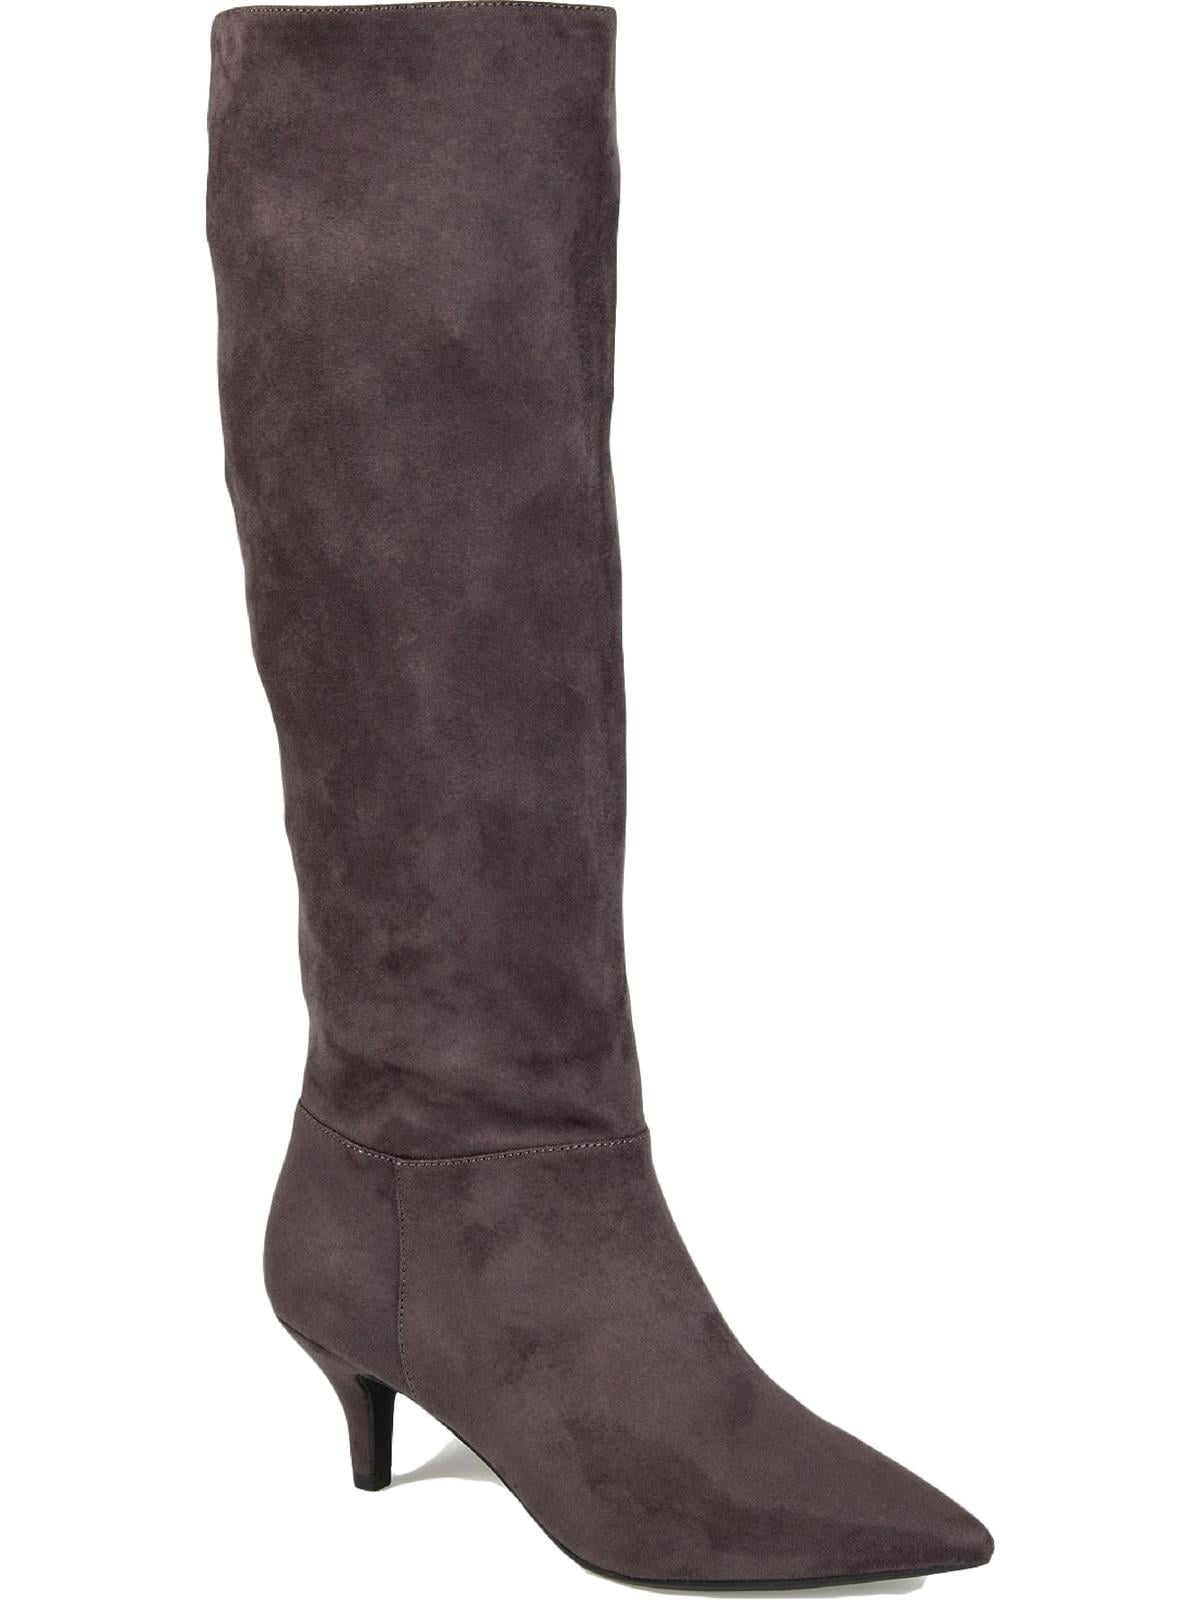 Journee Collection Womens VELLIA Faux Suede Pull-On Knee-High Boots ...